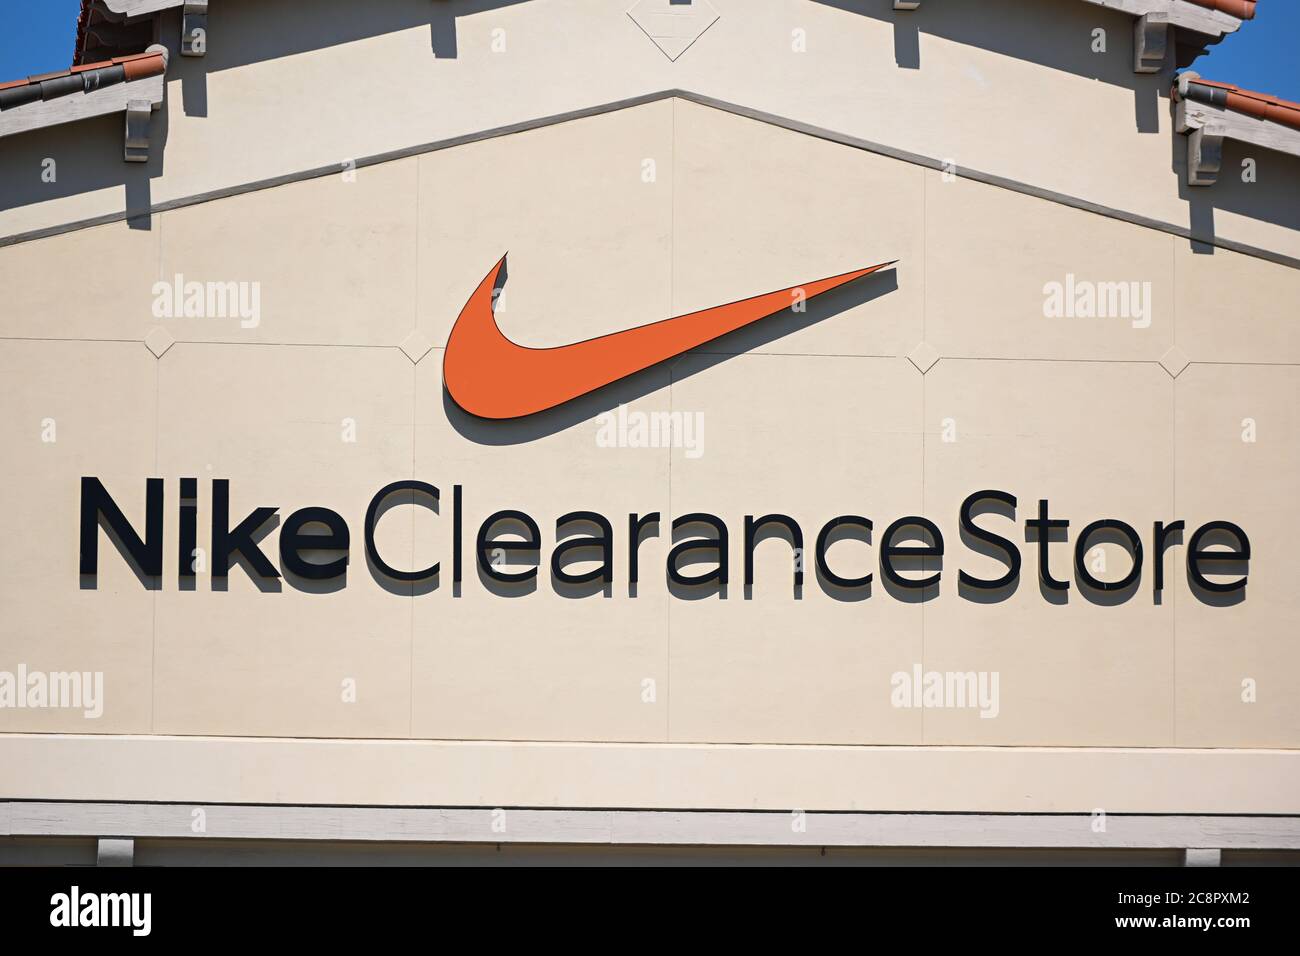 General overall view of Nike Clearance Store signage amid the